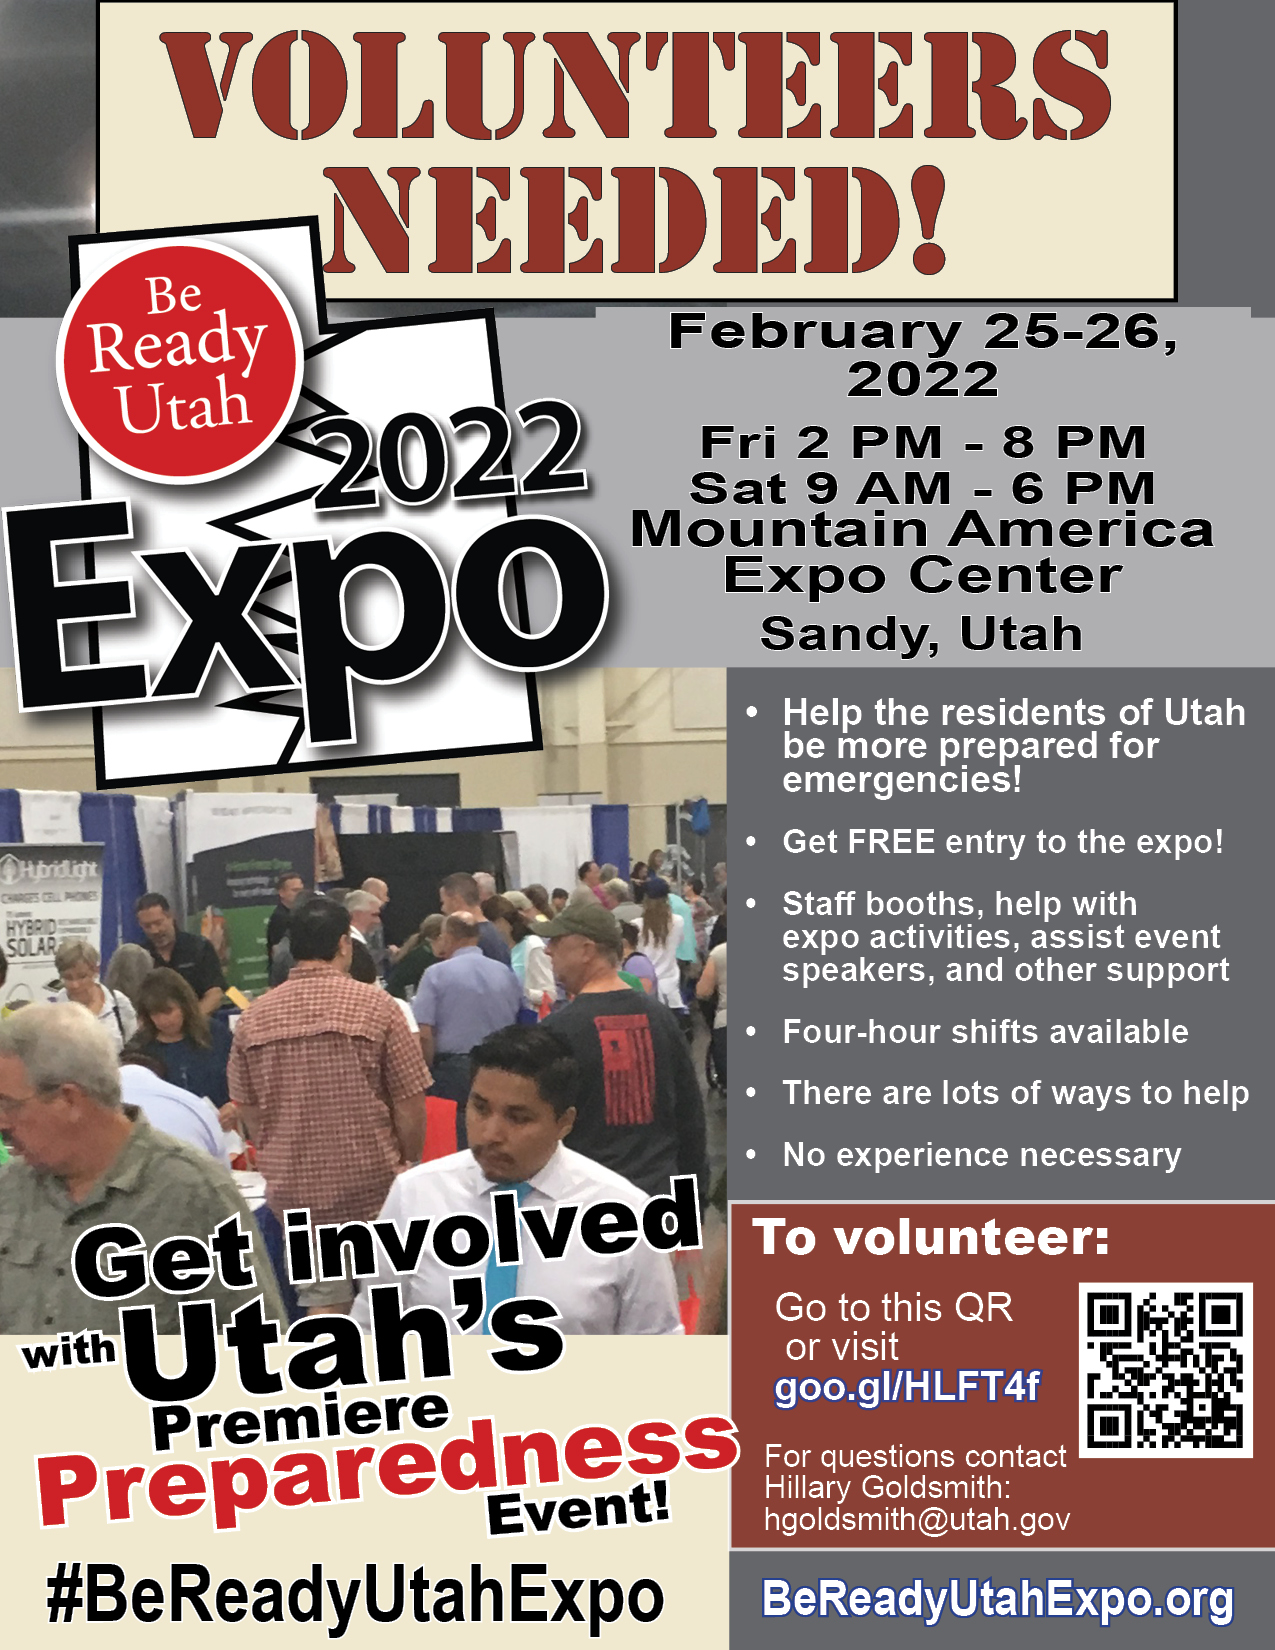  Flier enlisting volunteers for the Expo, with an image of a person filling a water jug.